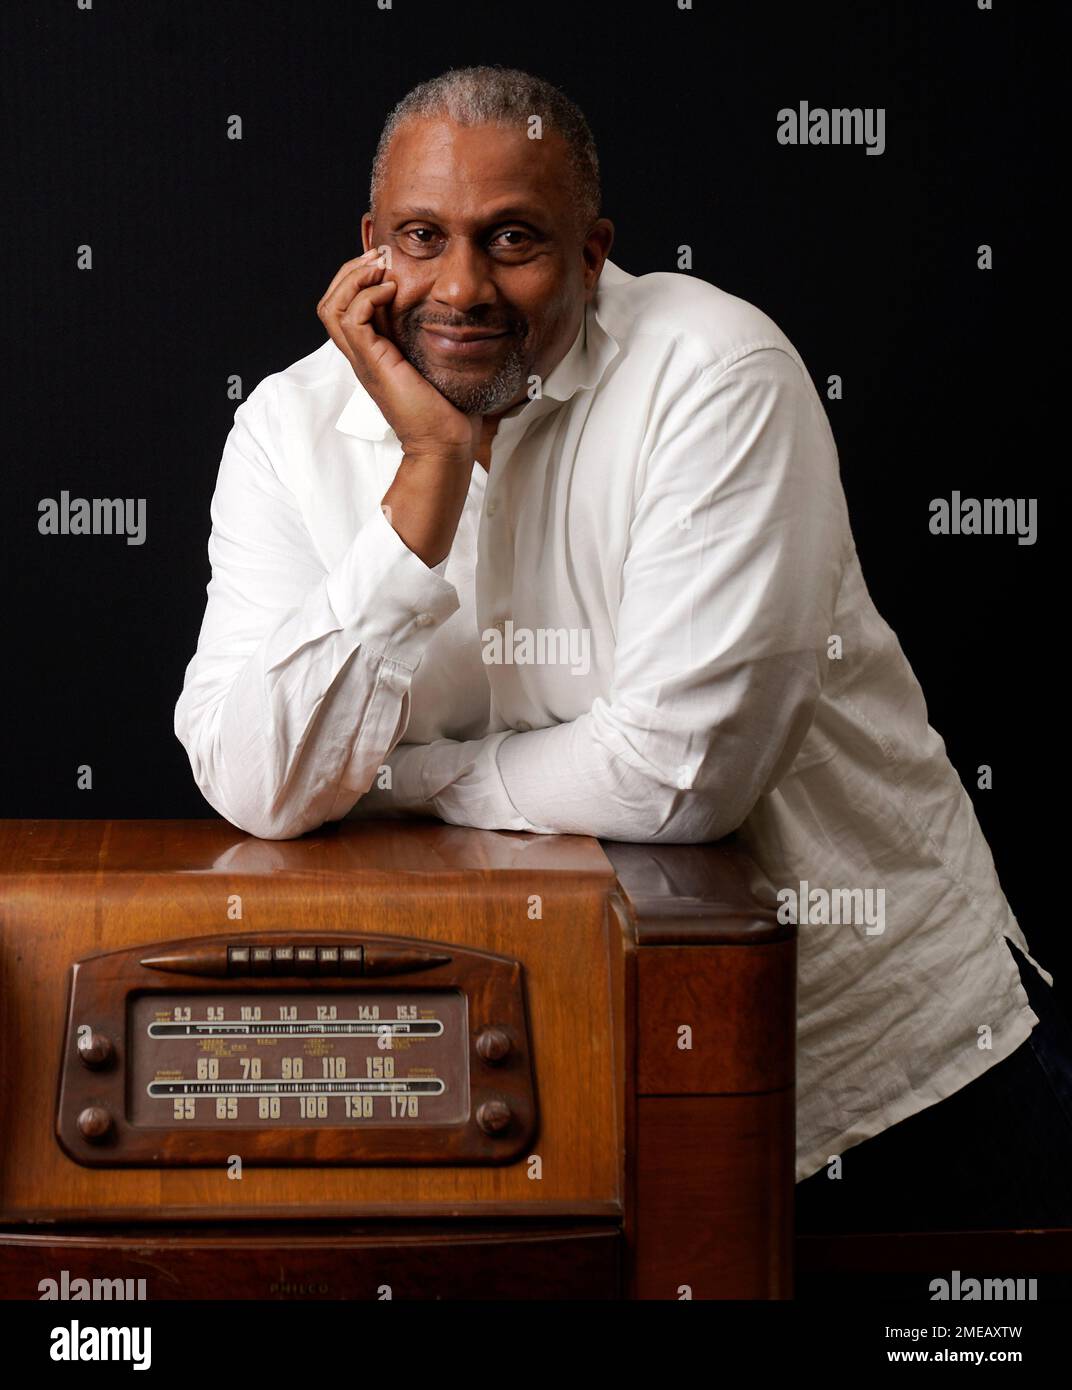 Tavis Smiley, owner of progressive talk radio station KBLA Los Angeles  (1580), poses for a portrait on a vintage AM radio in his station's  offices, Tuesday, June 15, 2021, in Los Angeles.